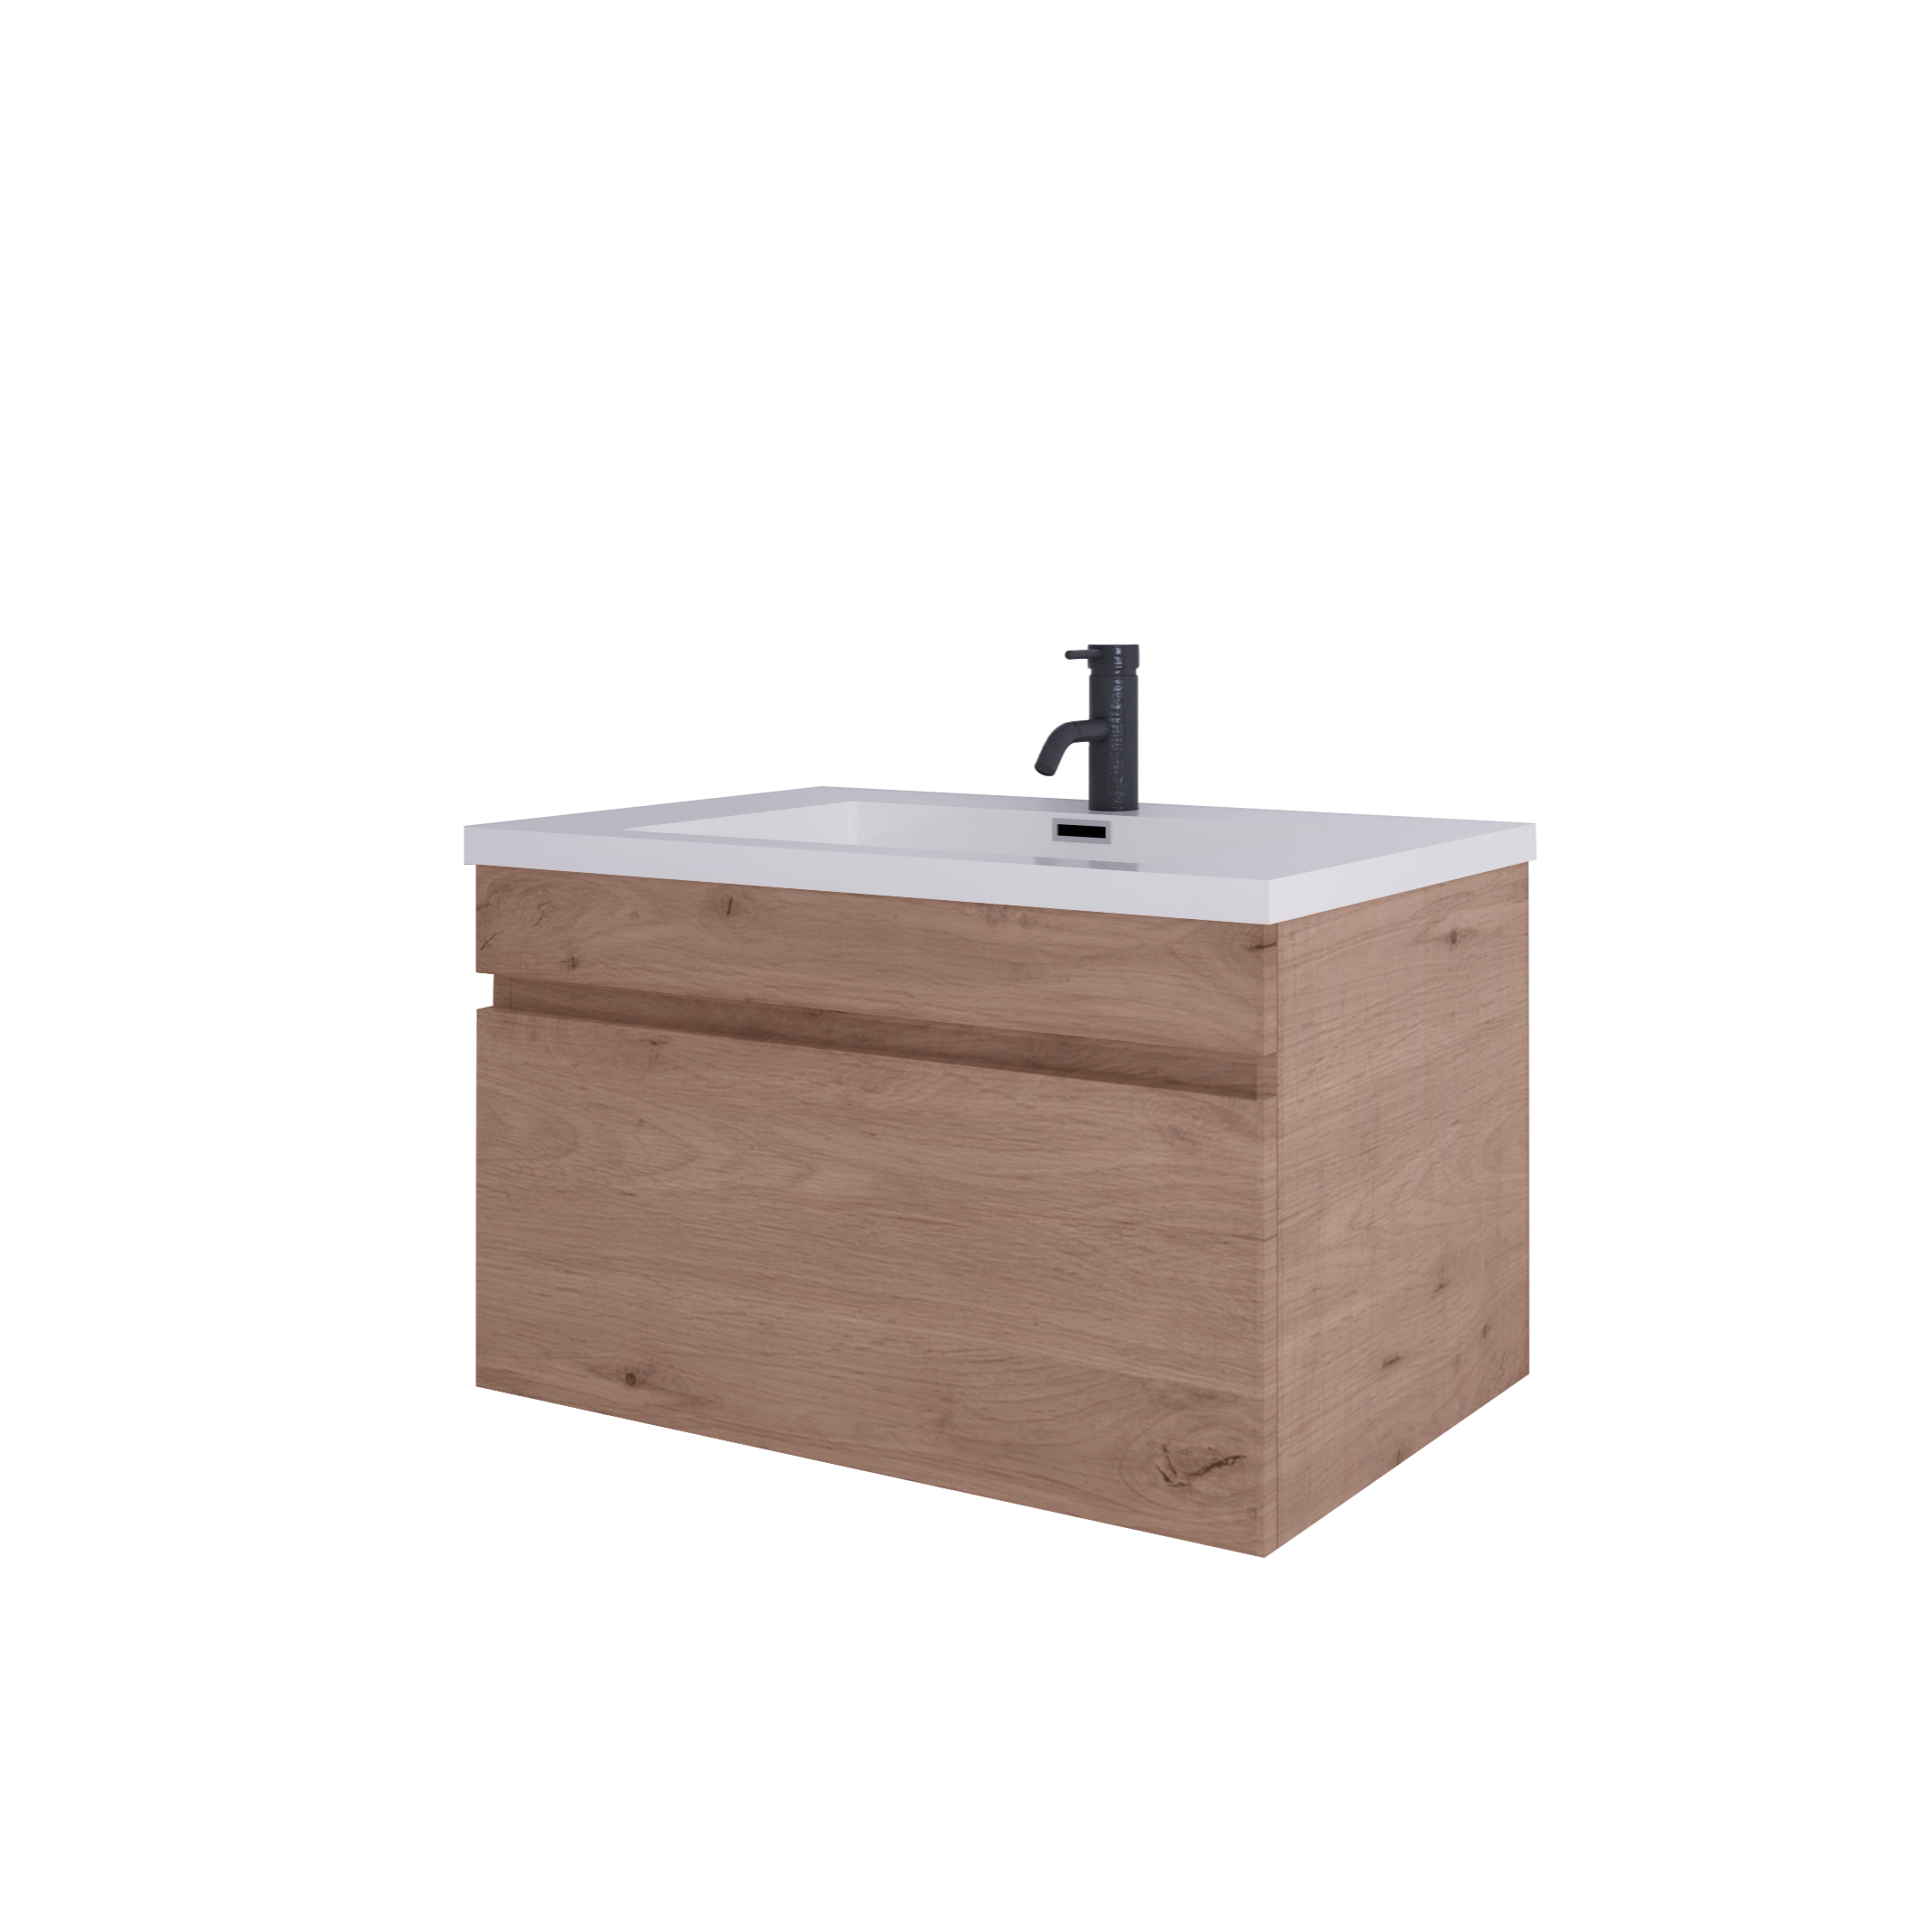 LUX 750 SINGLE DRAWER WALL HUNG VANITY